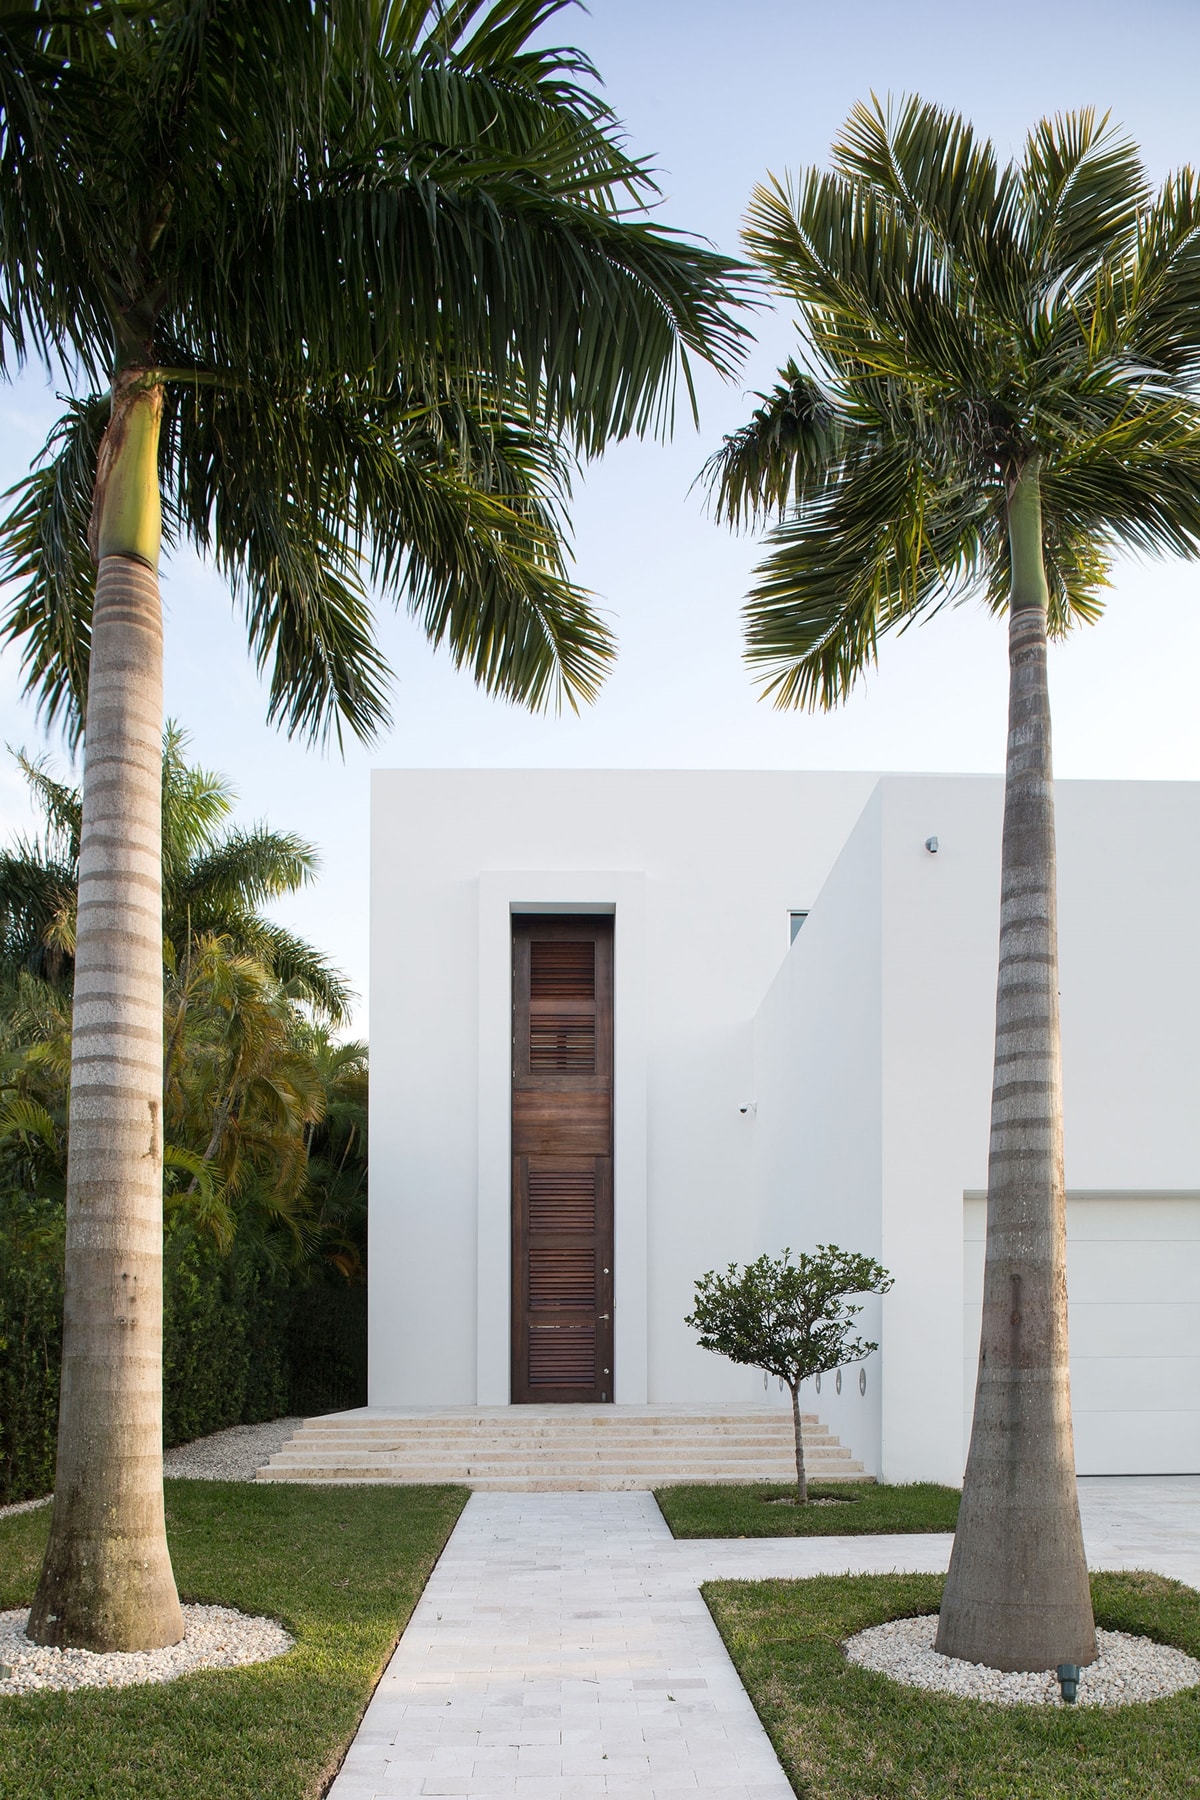 White brick walkway passing between two palm trees